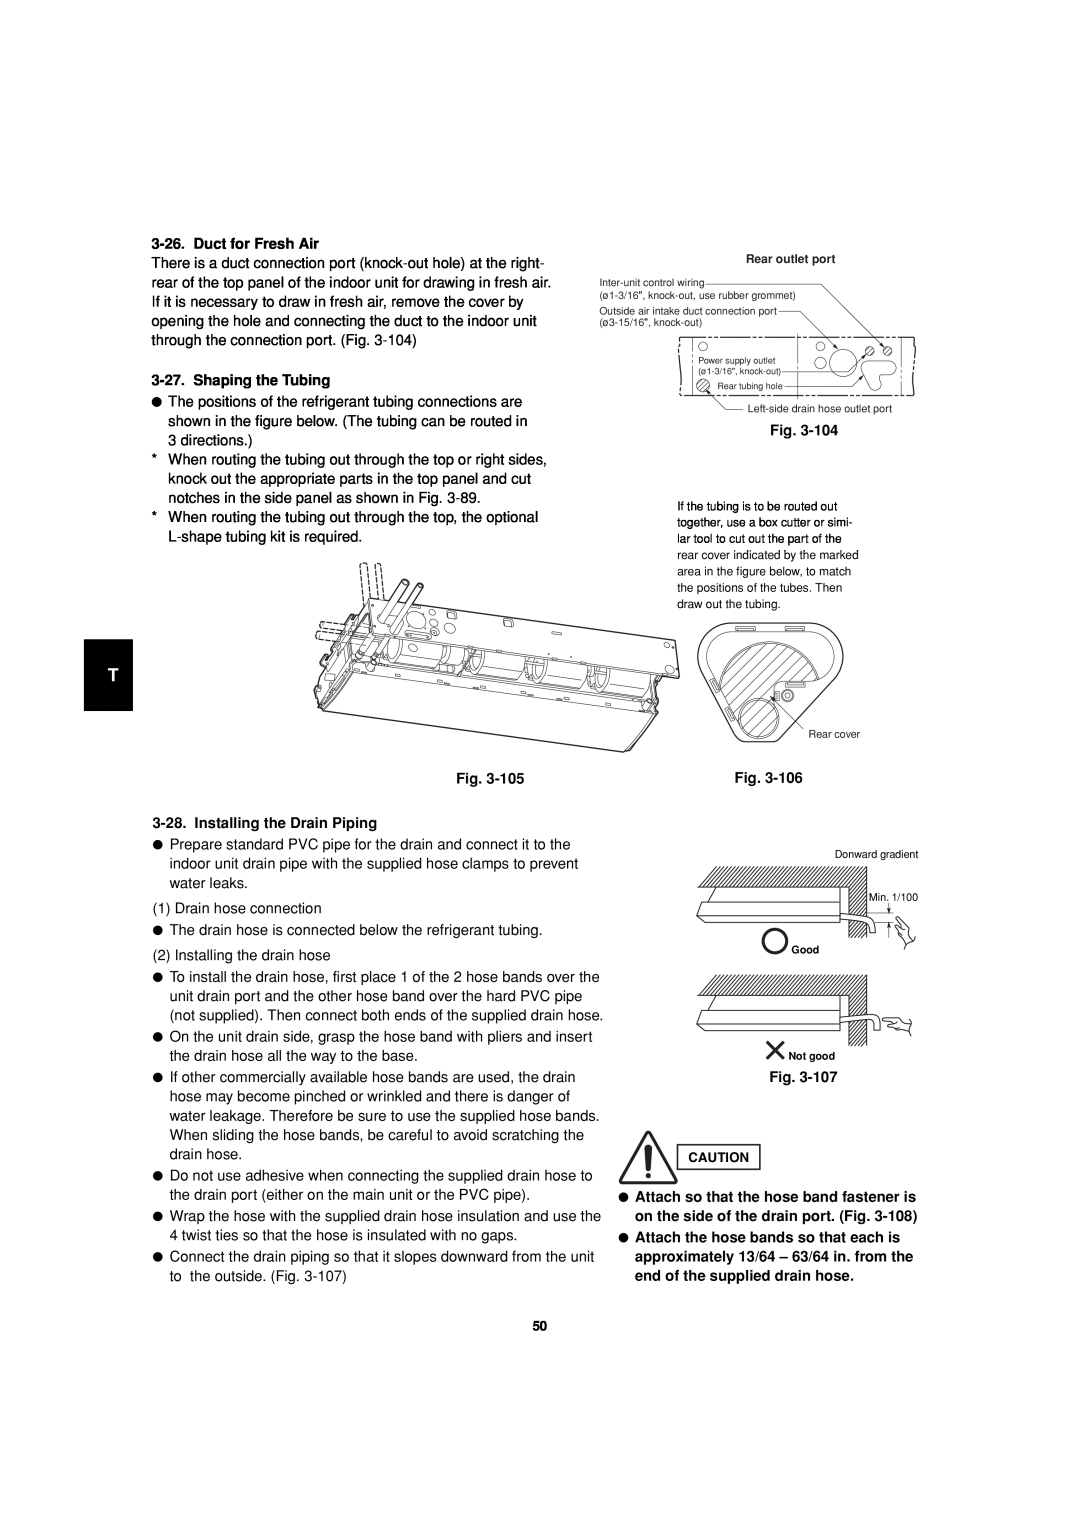 Sanyo 85464359981002 installation instructions Duct for Fresh Air, Shaping the Tubing, 28.Installing the Drain Piping, Fig 